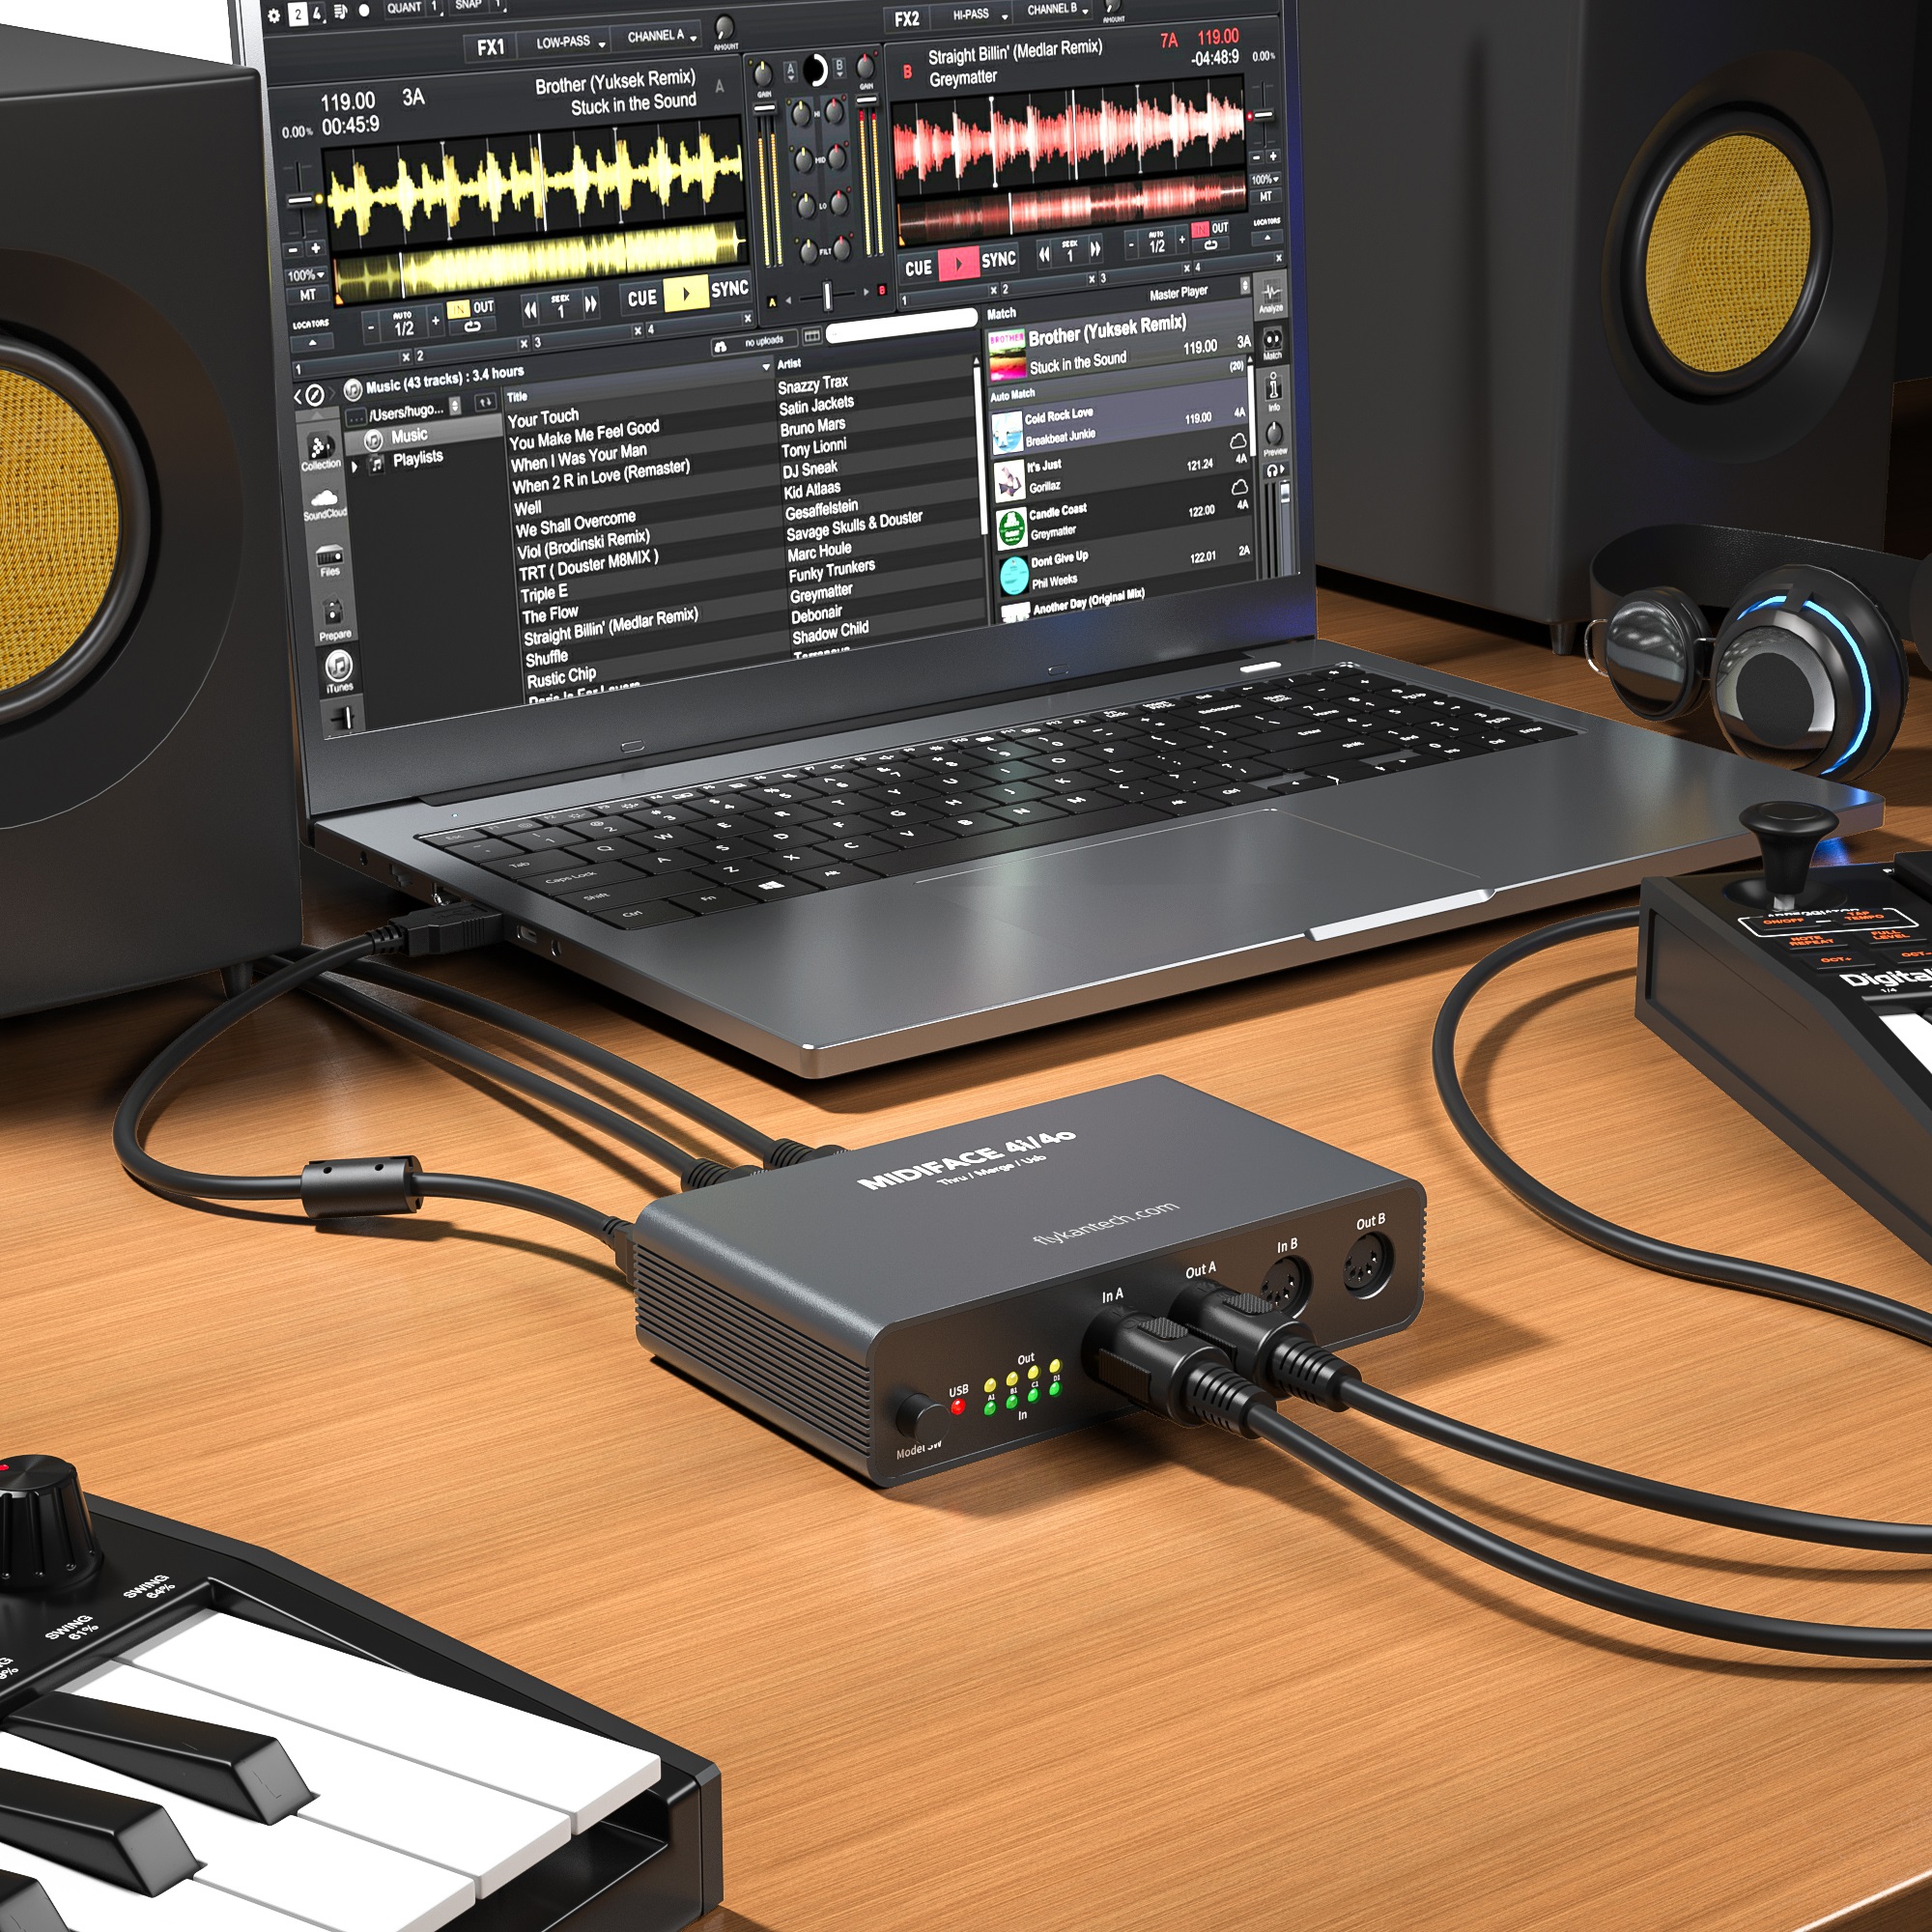 MIDIPHILER-II: Professional 3-in-1 MIDI Interface Box with Cascading Capabilities